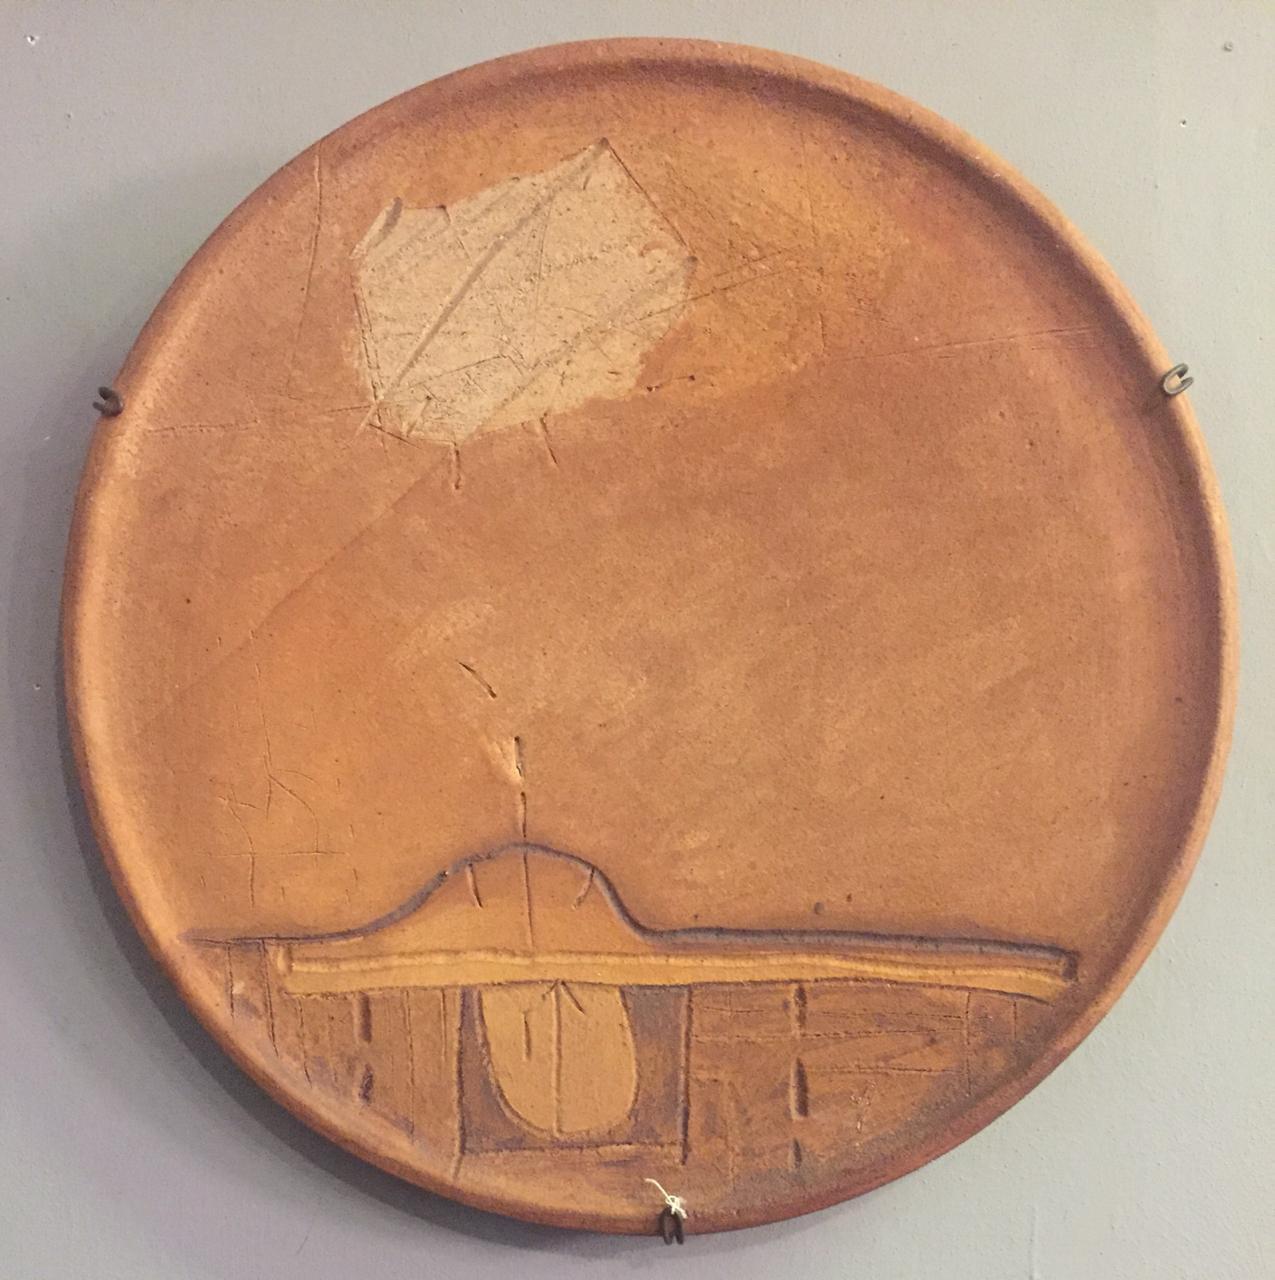 A high temperature ceramic plate by Mexican artist Juan Manuel De la Rosa. Sgraffito and hand painted. Signed on back. Certificate and metal plate hanger included.

Juan Manuel De la Rosa (born 1945) is a Mexican artist, painter, engraver,